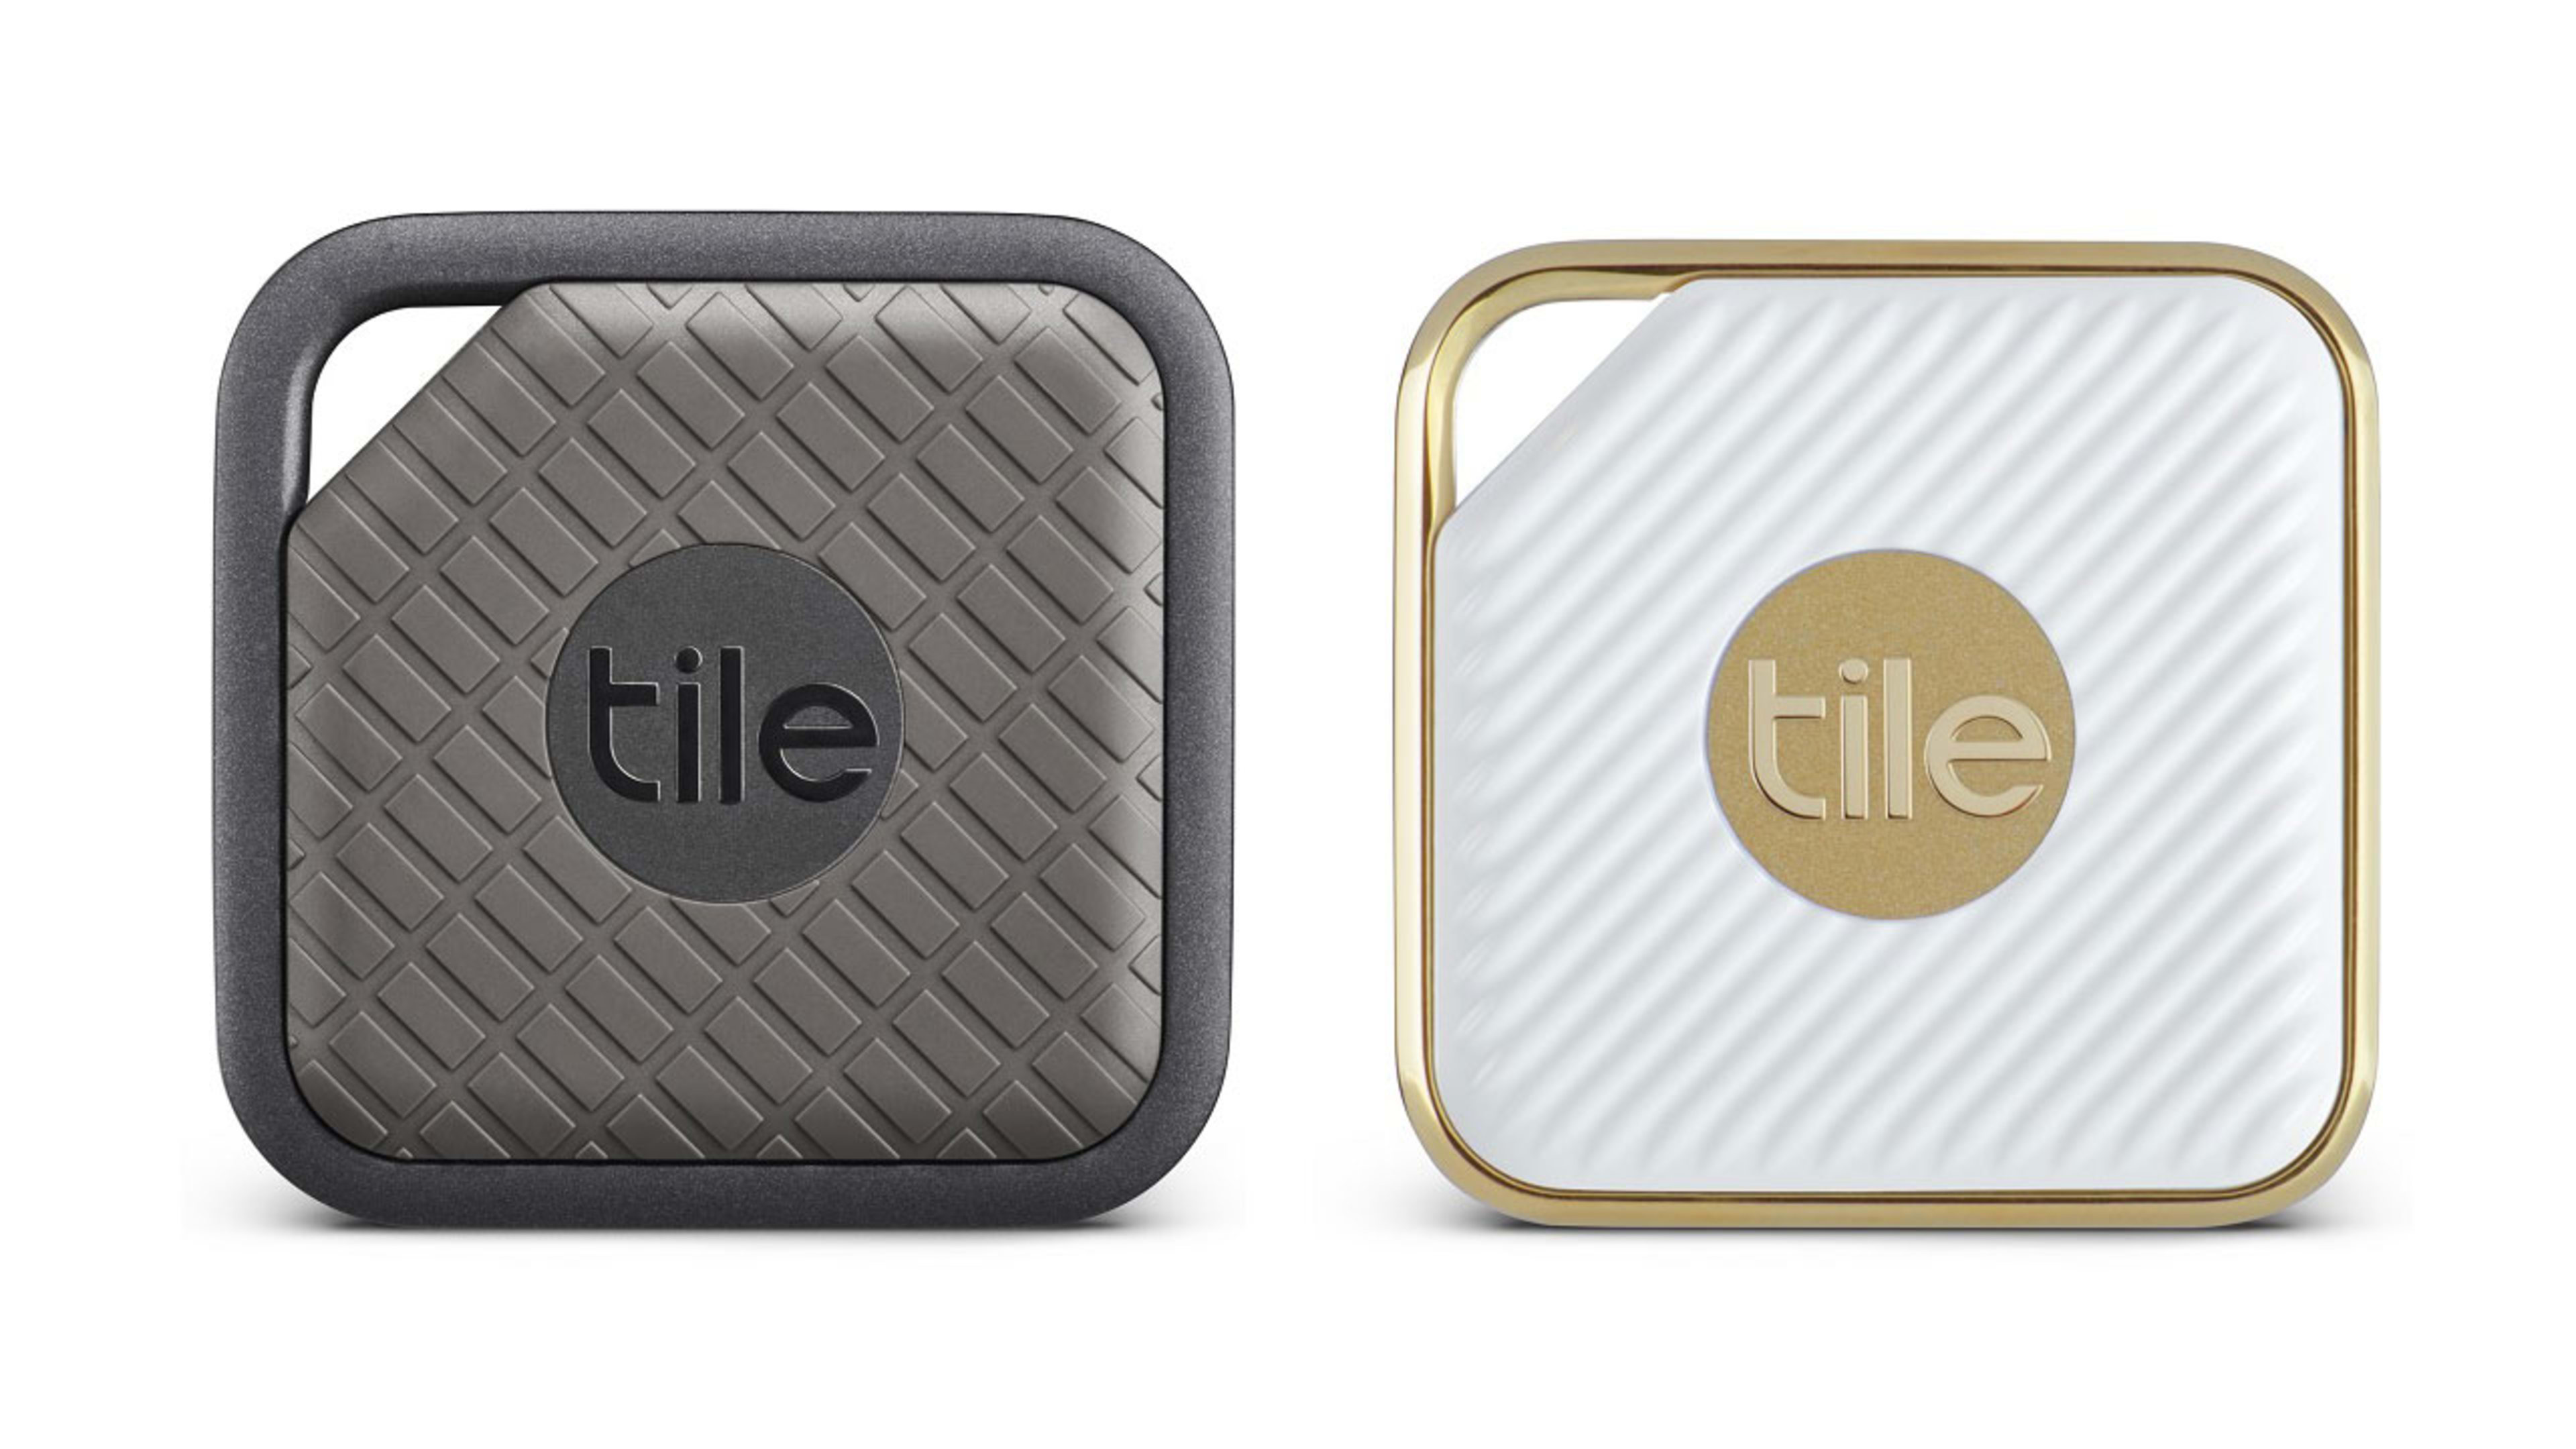 Tile really wants you to notice its new Bluetooth trackers